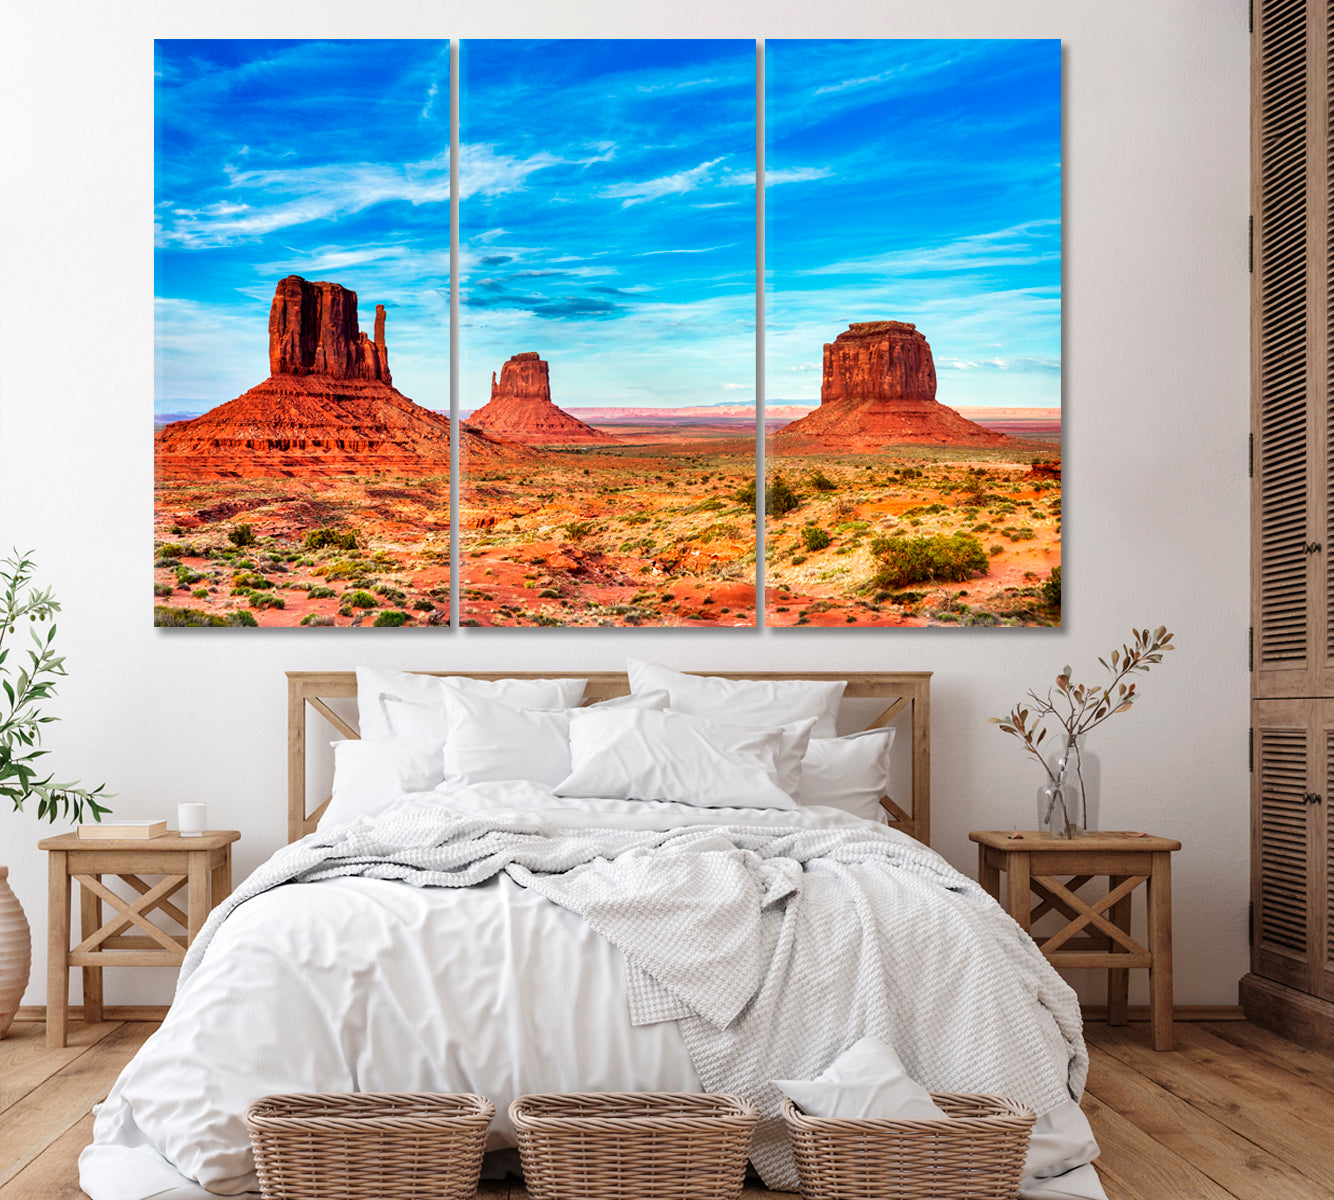 Oljato-Monument Valley Utah United States Canvas Print ArtLexy 3 Panels 36"x24" inches 